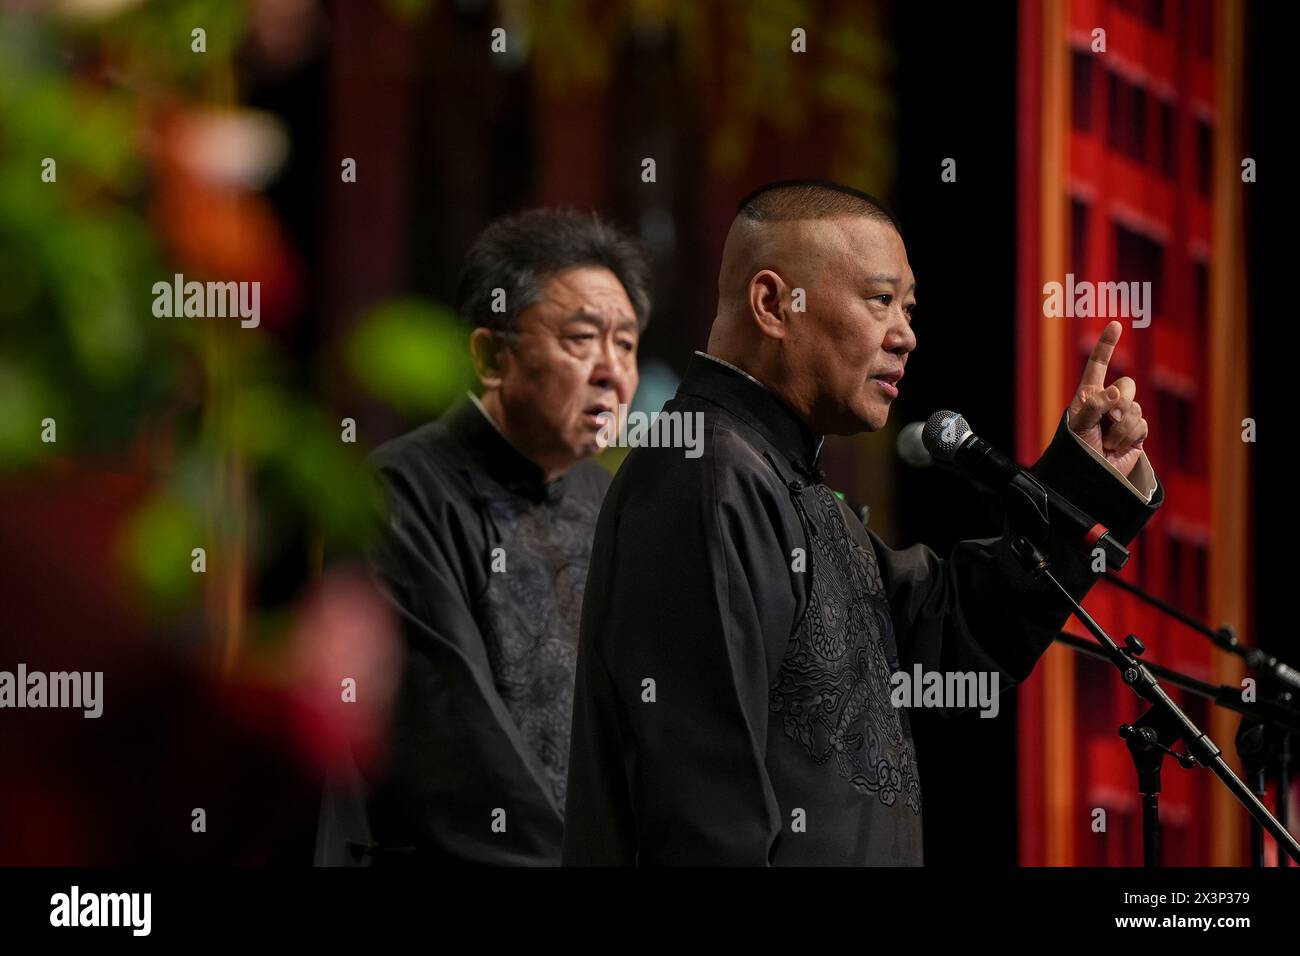 (240428) -- LONDON, April 28, 2024 (Xinhua) -- Guo Degang (R) and Yu Qian perform Xiangsheng, or crosstalk comedy in London, Britain, April 27, 2024. Thunderous laughter and applause almost blew off the roof of an auditorium in London's ExCeL Exhibition Centre on Saturday night, when a punchline by Guo Degang, a popular Chinese traditional crosstalk comedian, landed with an audience of thousands. Along with Guo and his partner Yu Qian, a handful of comedians from the De Yun She Performance Group performed Xiangsheng, or crosstalk comedy, with both jokes about life anecdotes and traditional Stock Photo